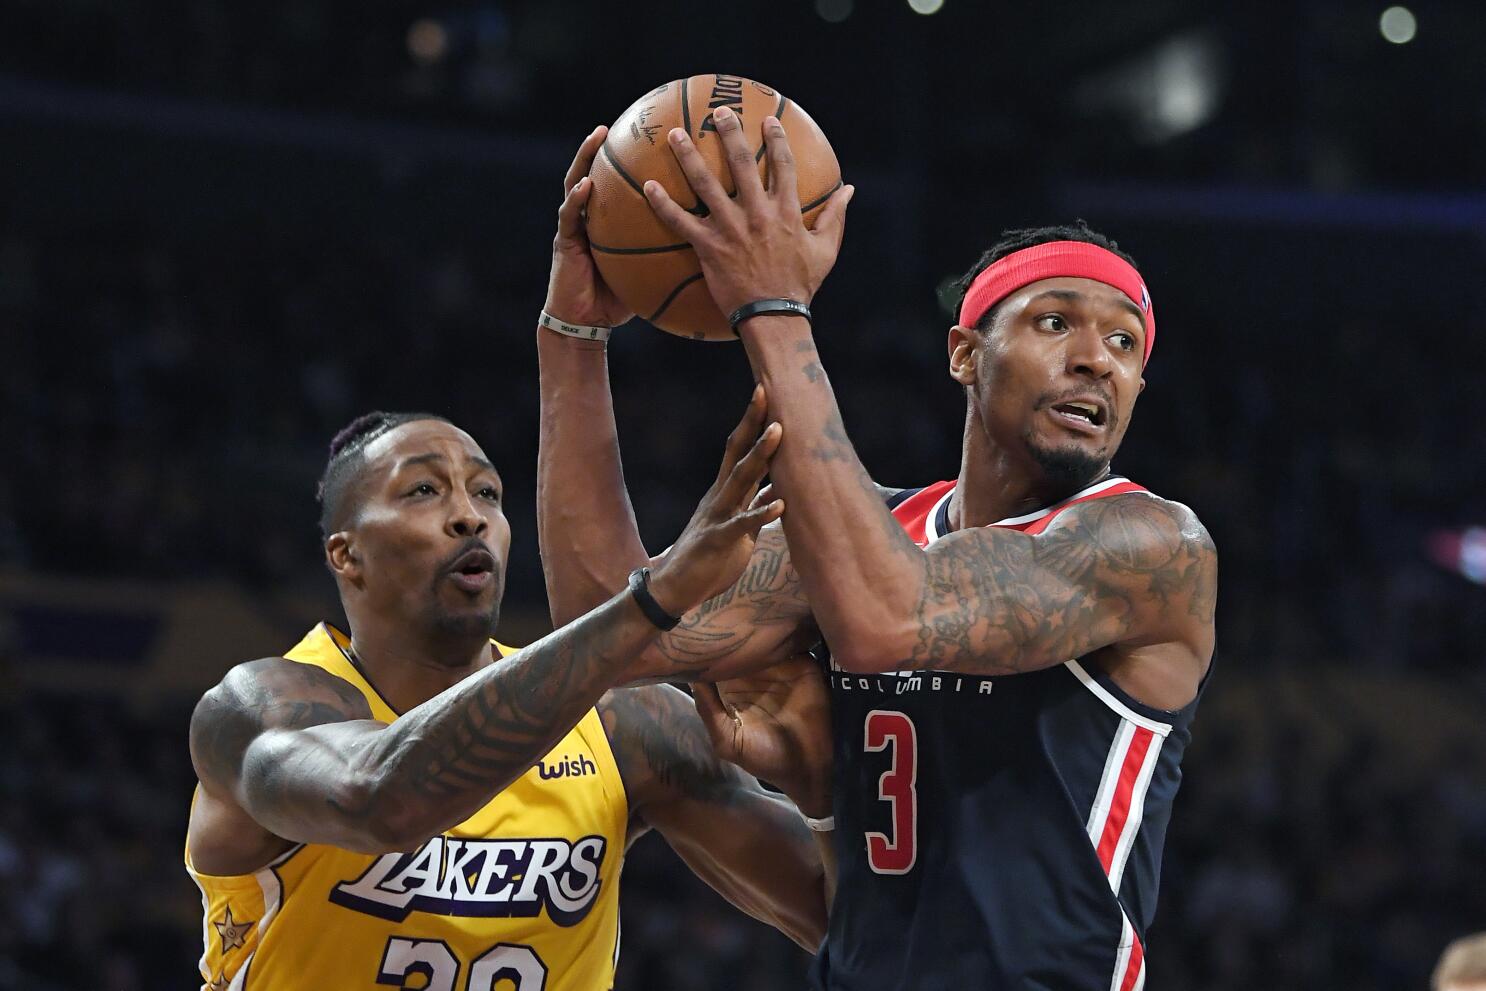 NBA: Wizards could sign Bradley Beal to extension, but should he?